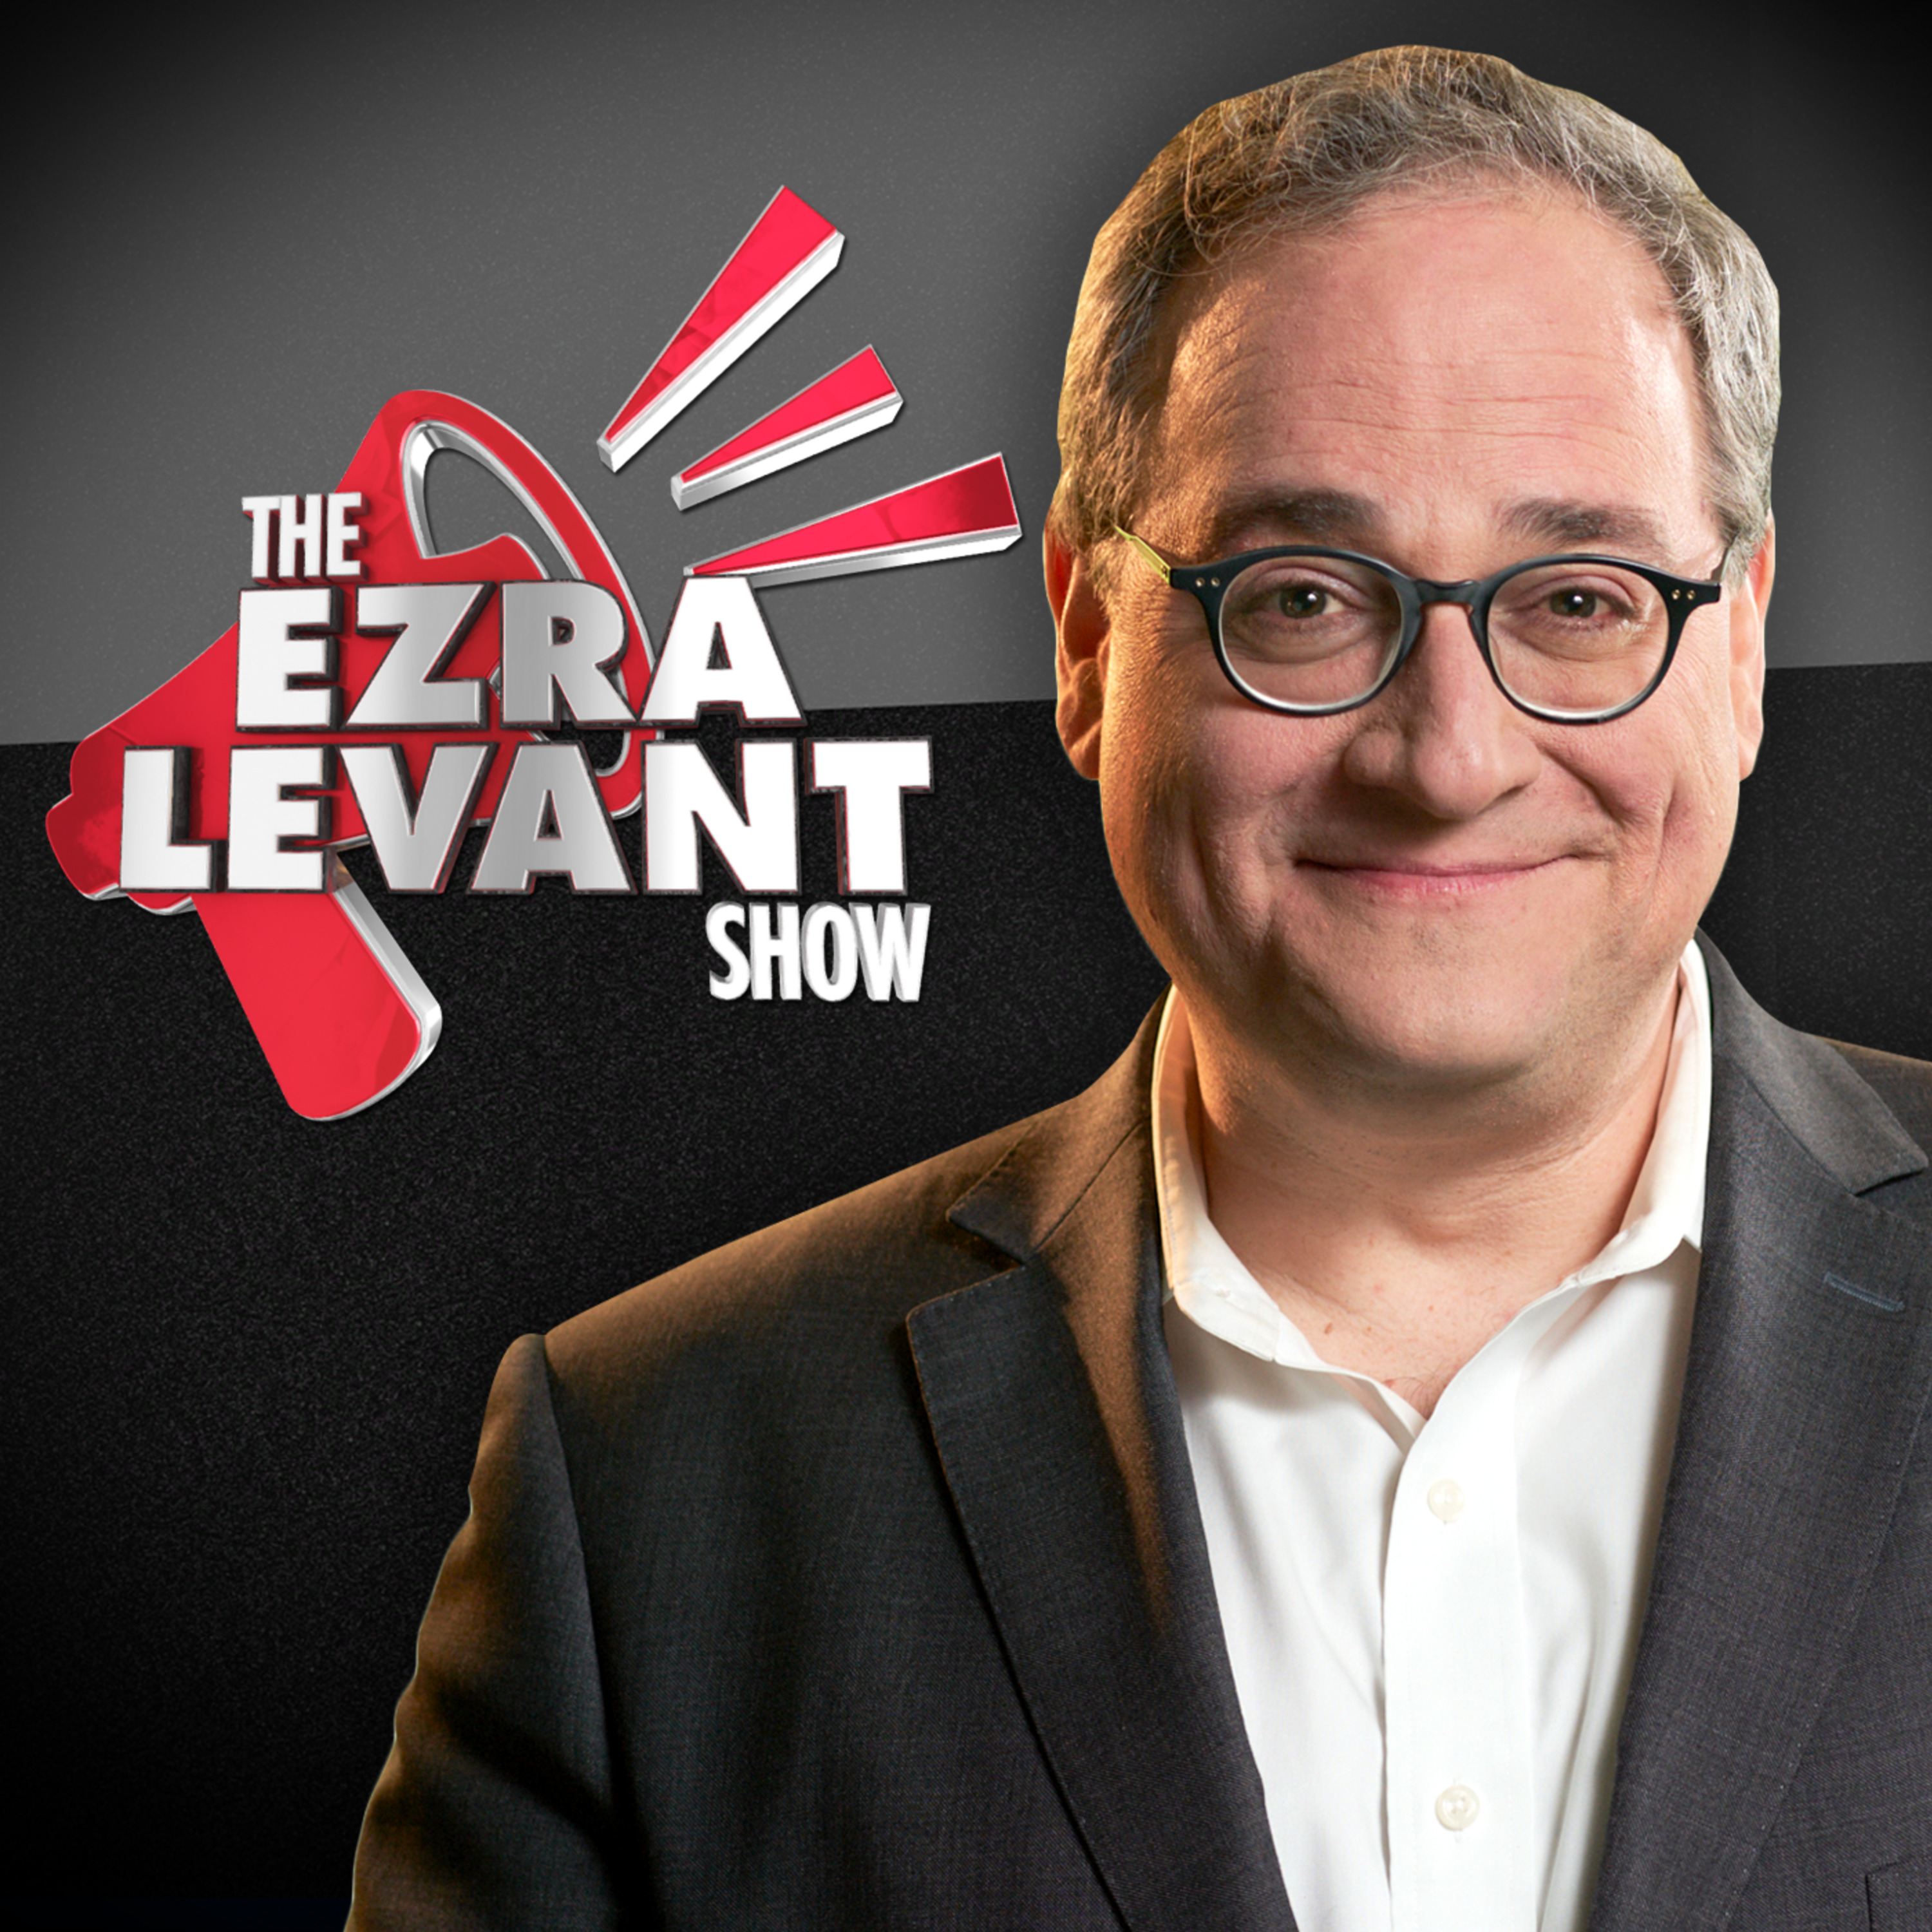 EZRA LEVANT | We in Canada admire America, so we’re concerned when we see it falling away from freedom